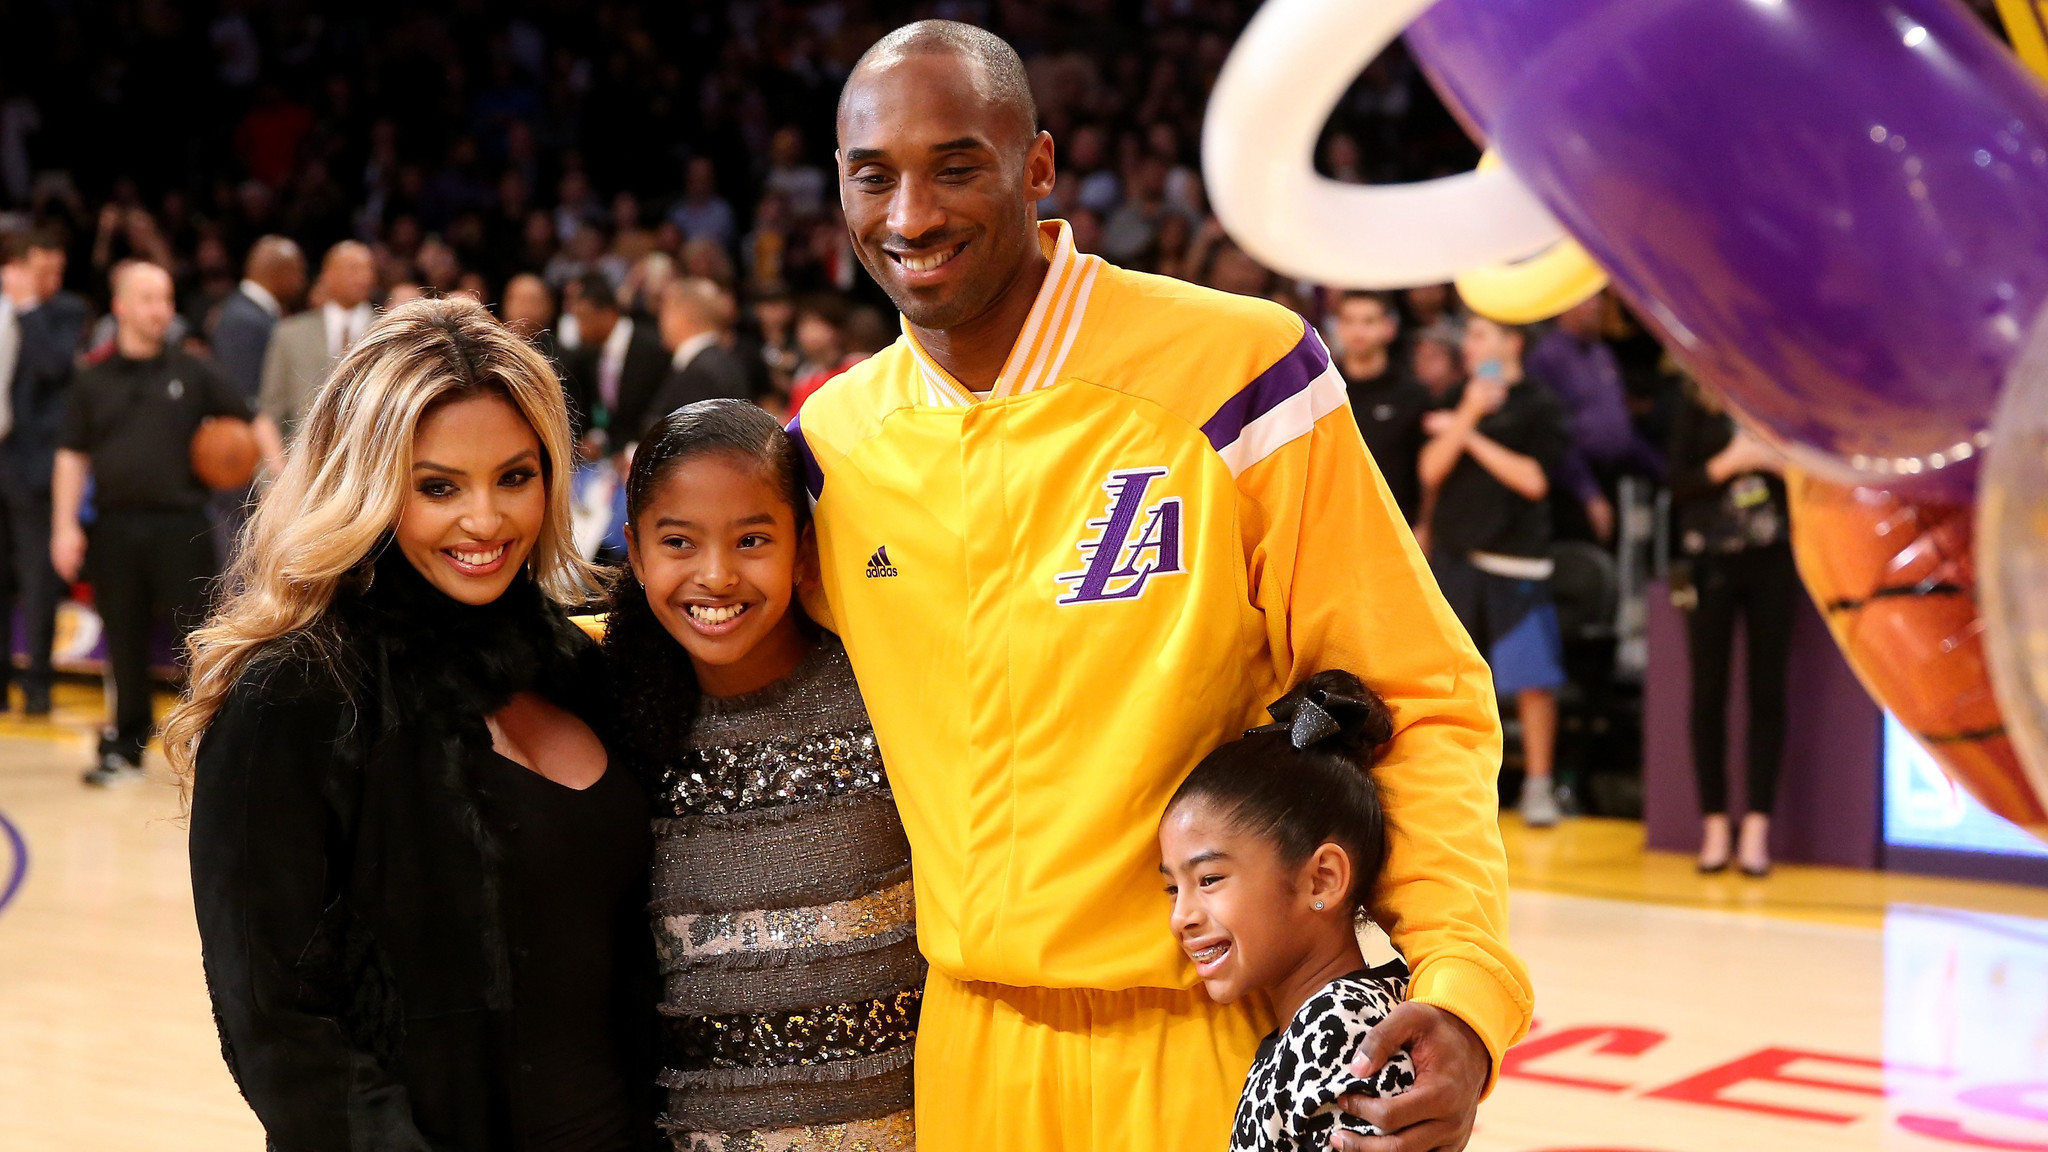 Lakers Legend Kobe Bryant’s NBA Career Comes to a Close - Gentlemens